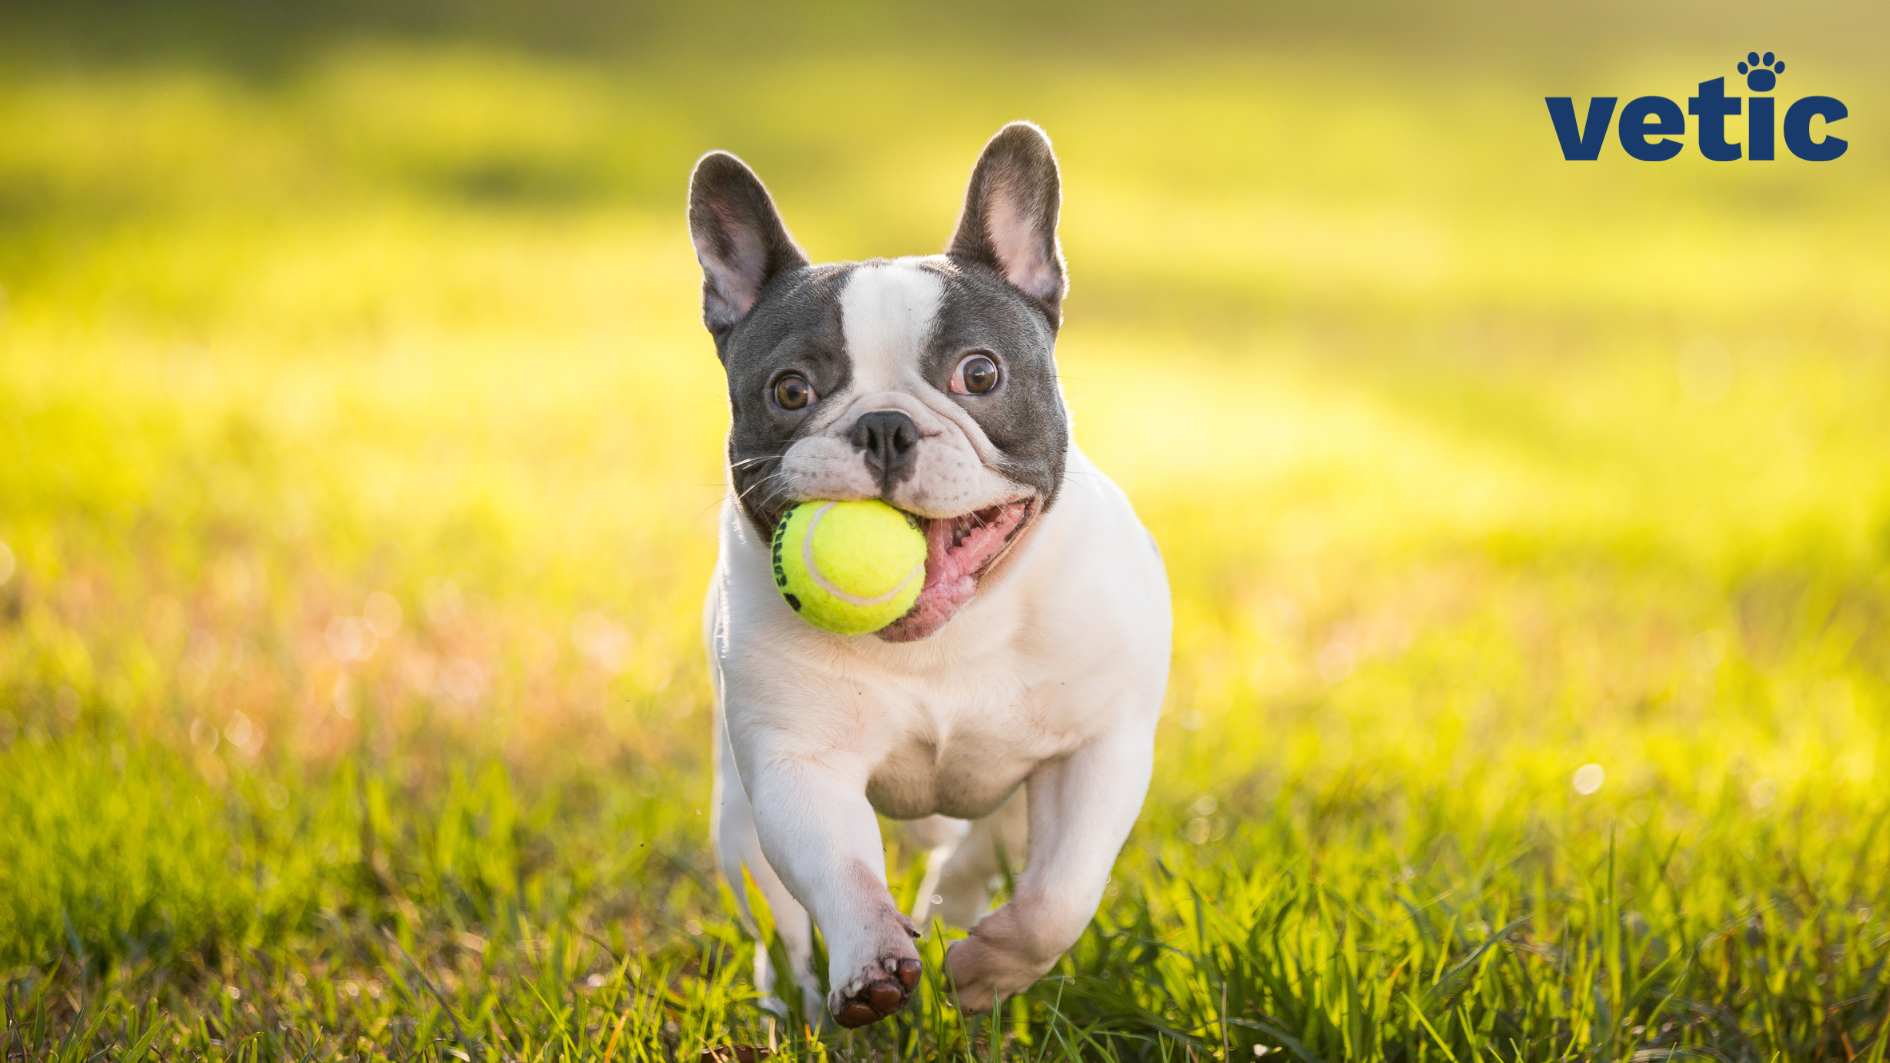 A junior French Bulldog running towards the camera with a green tennis ball in their mouth. The dog is mostly white/fawn in colour with grey patches on their eyes and ears.